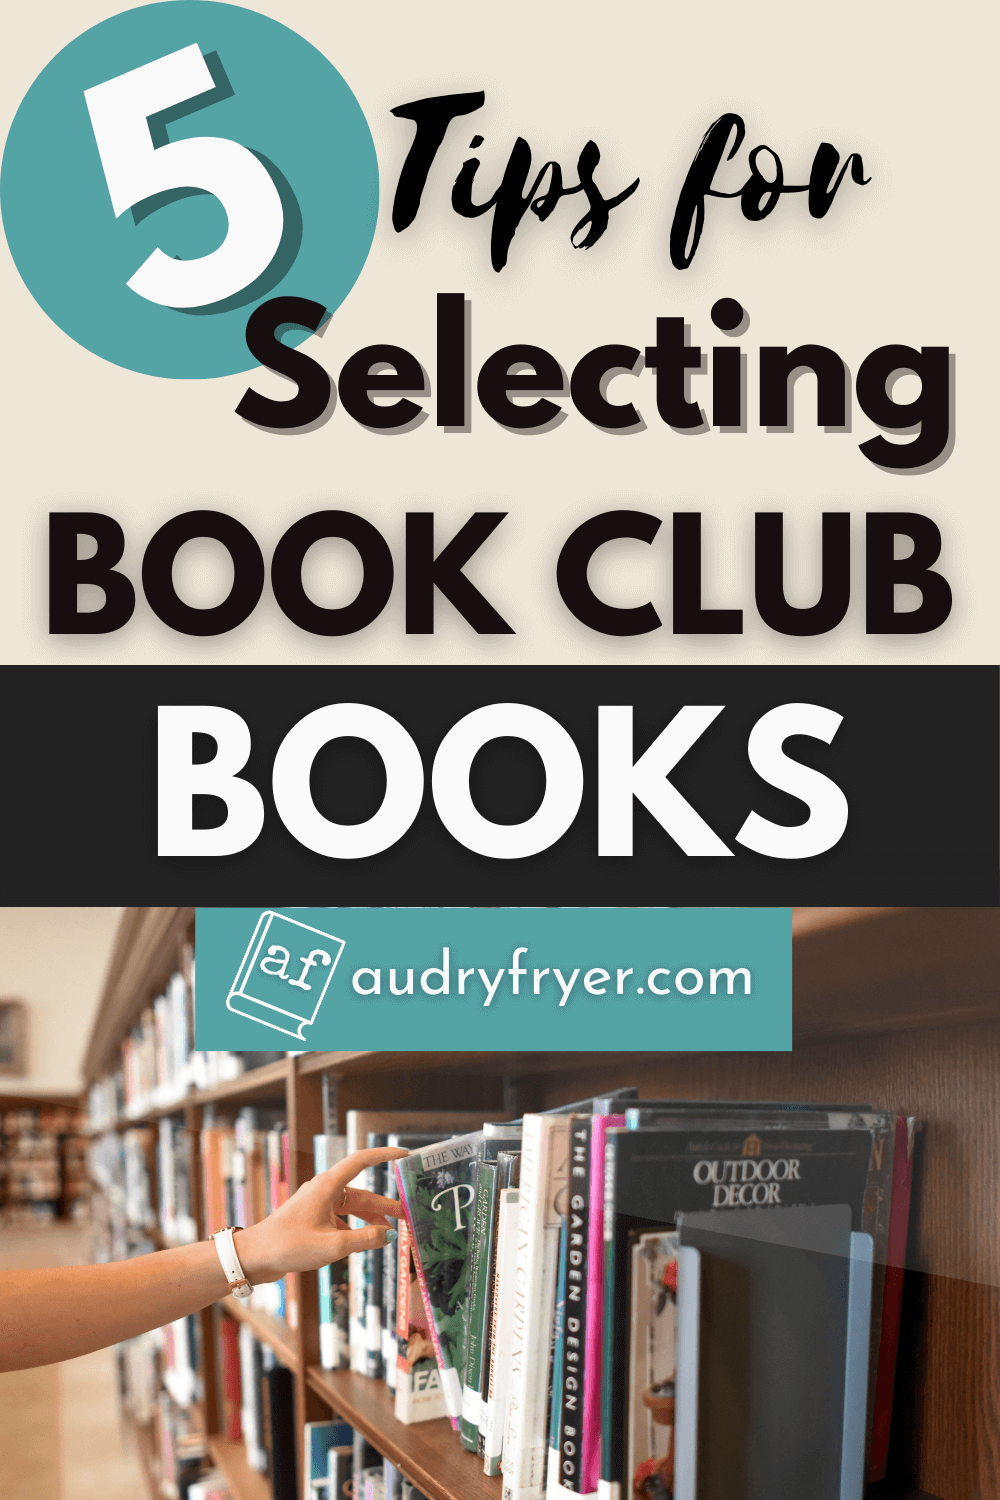 5 tips for selecting book club books